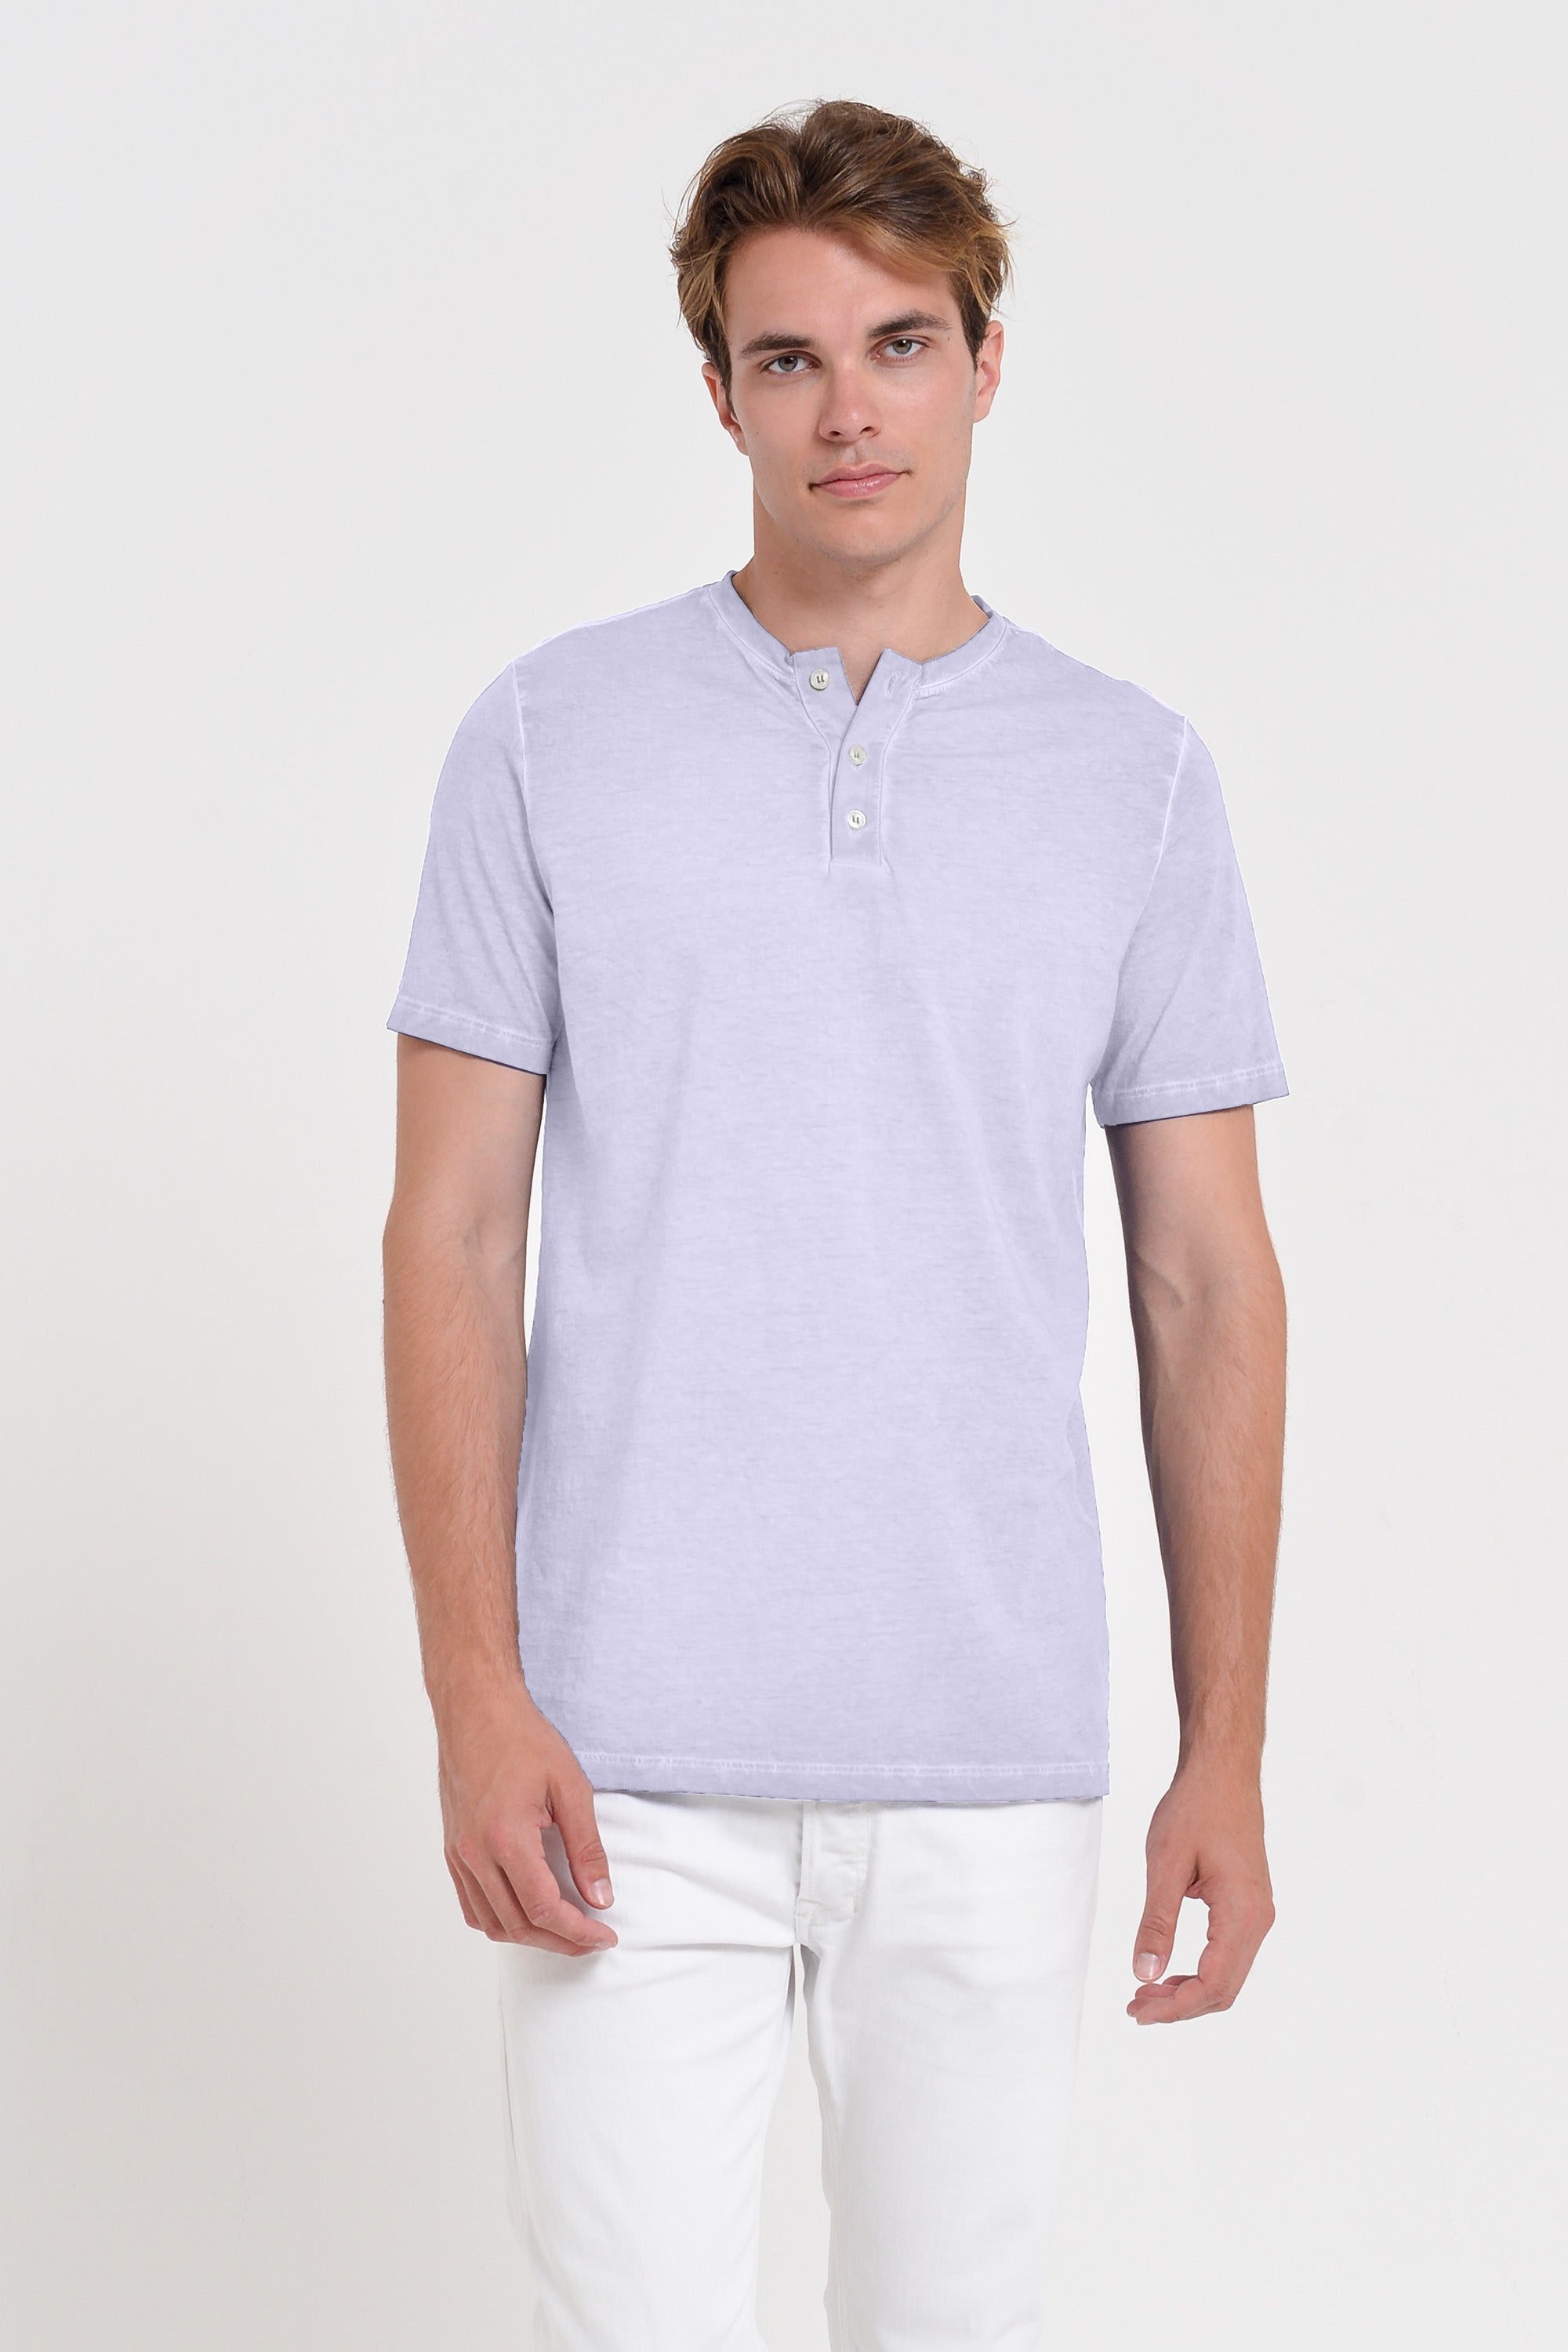 Paddle Henley - Lilac